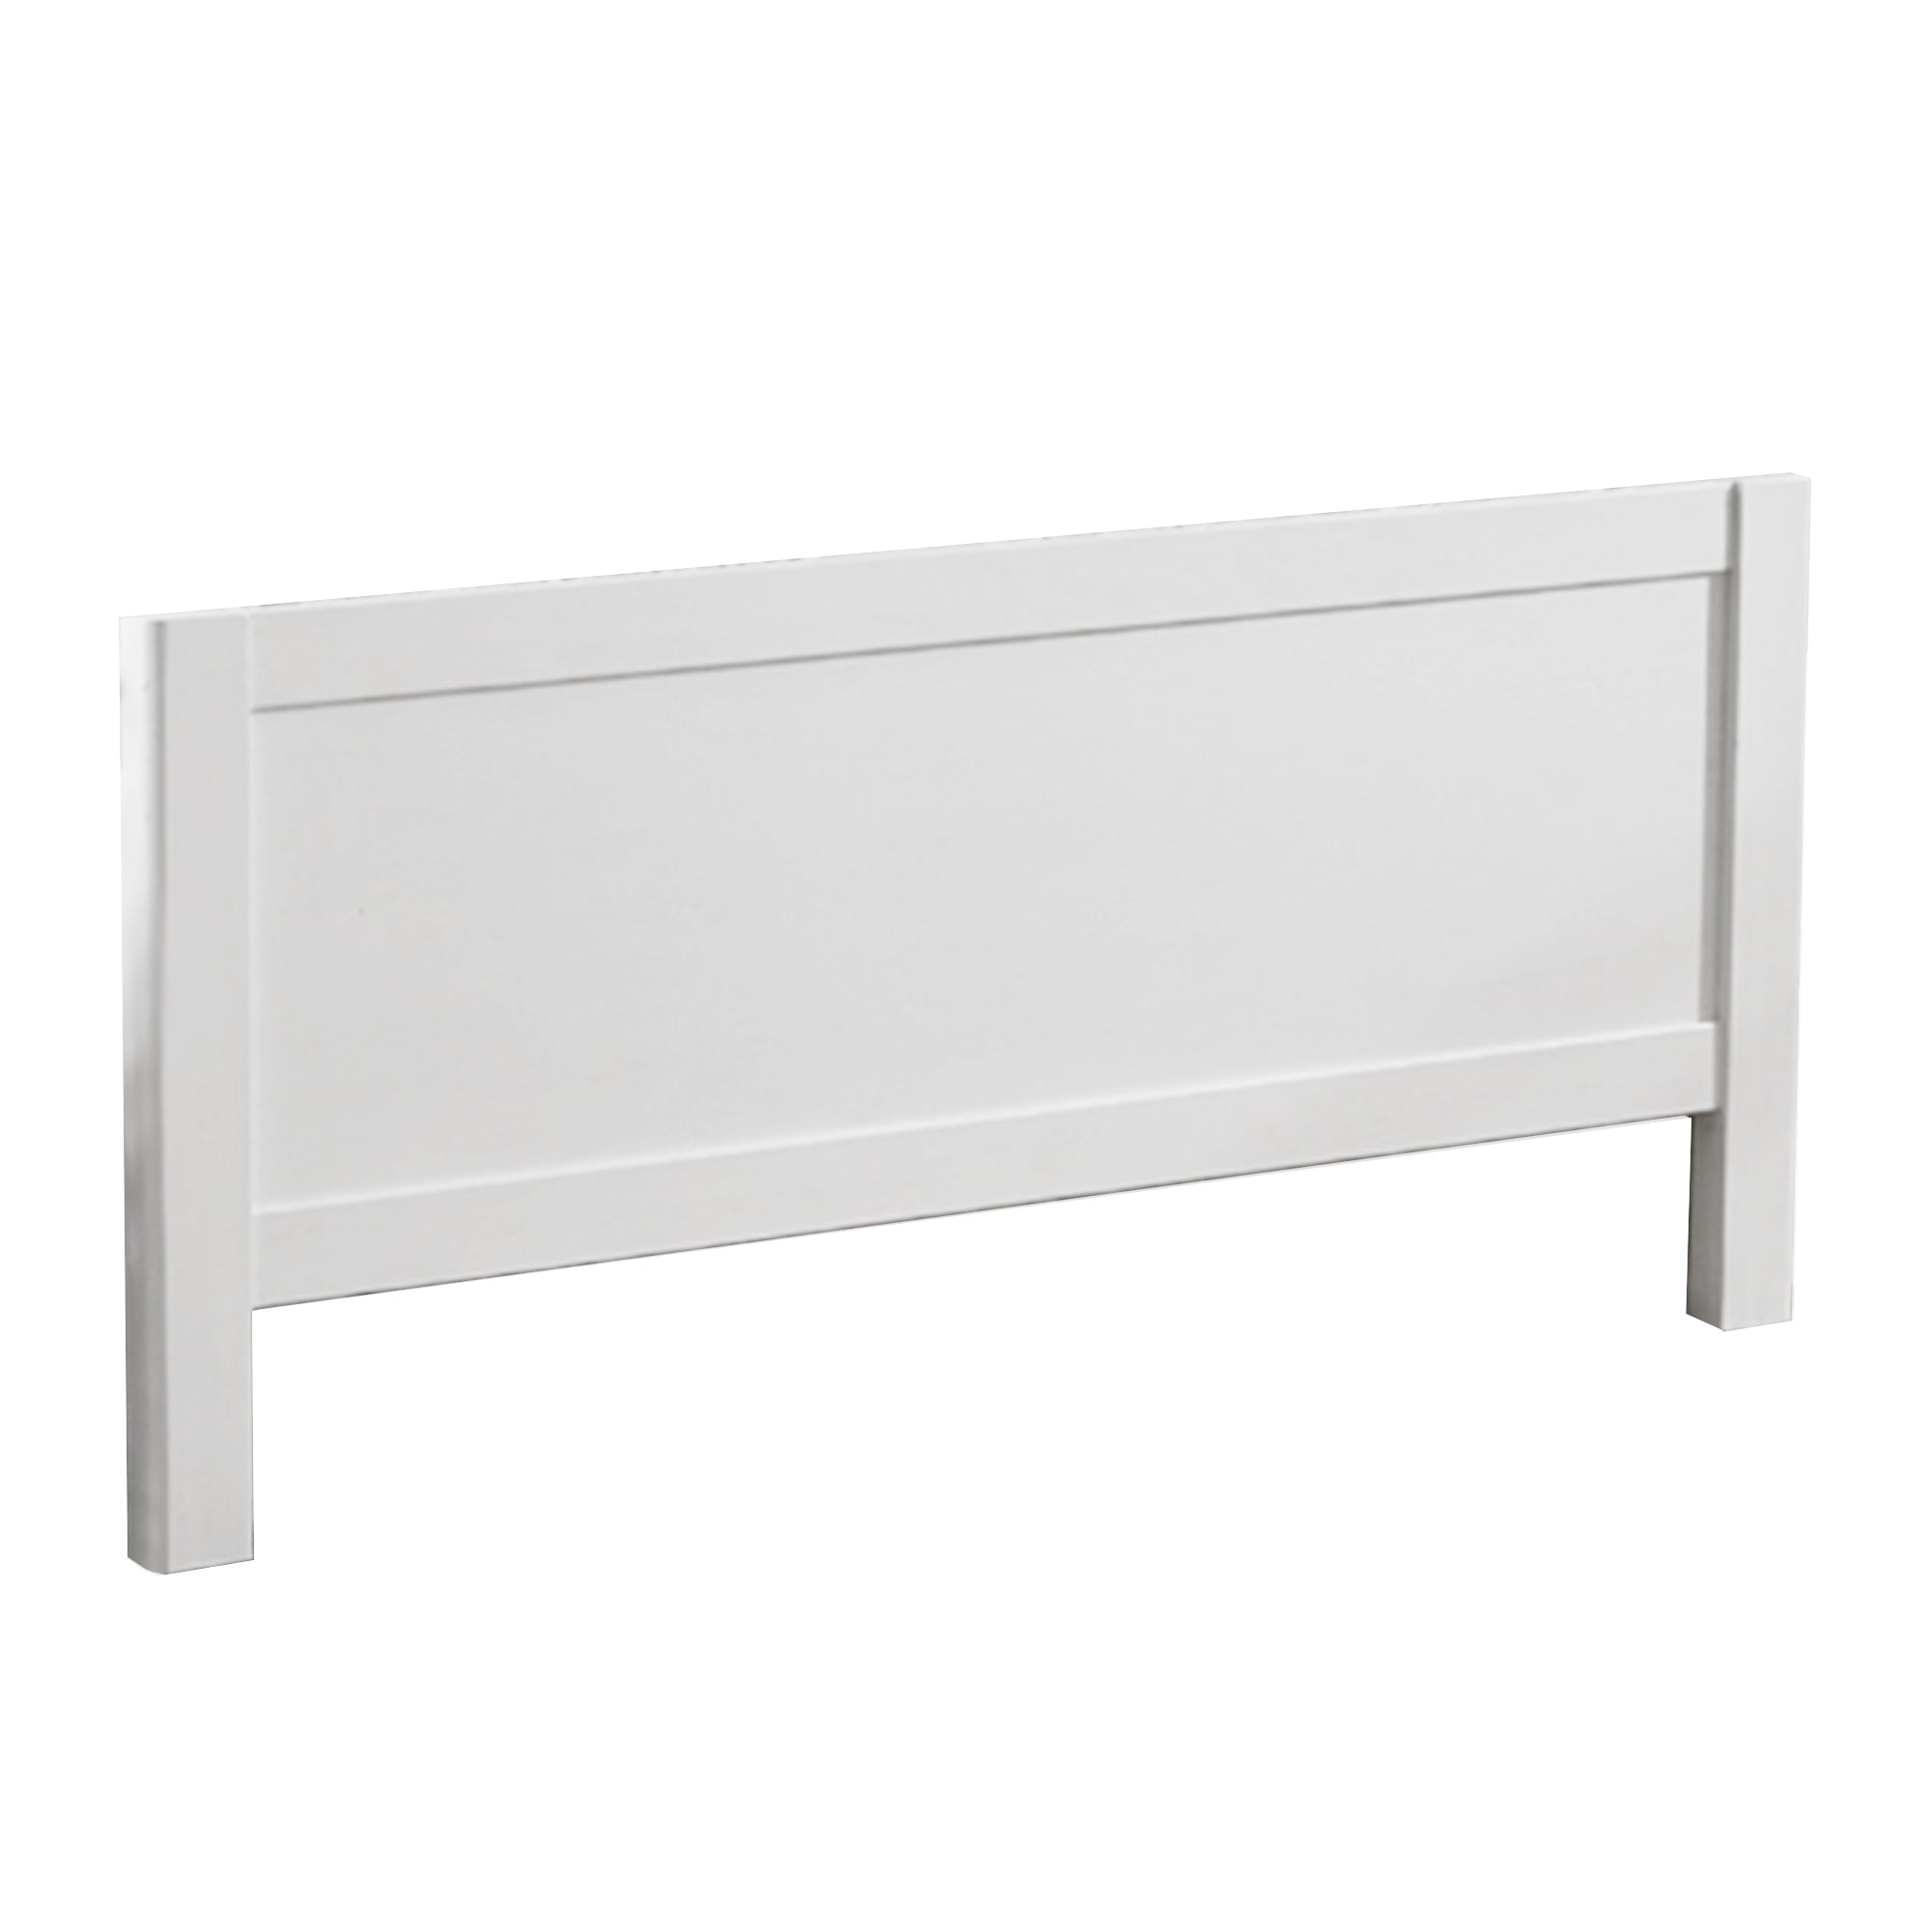 Como low profile footboard in vintage white